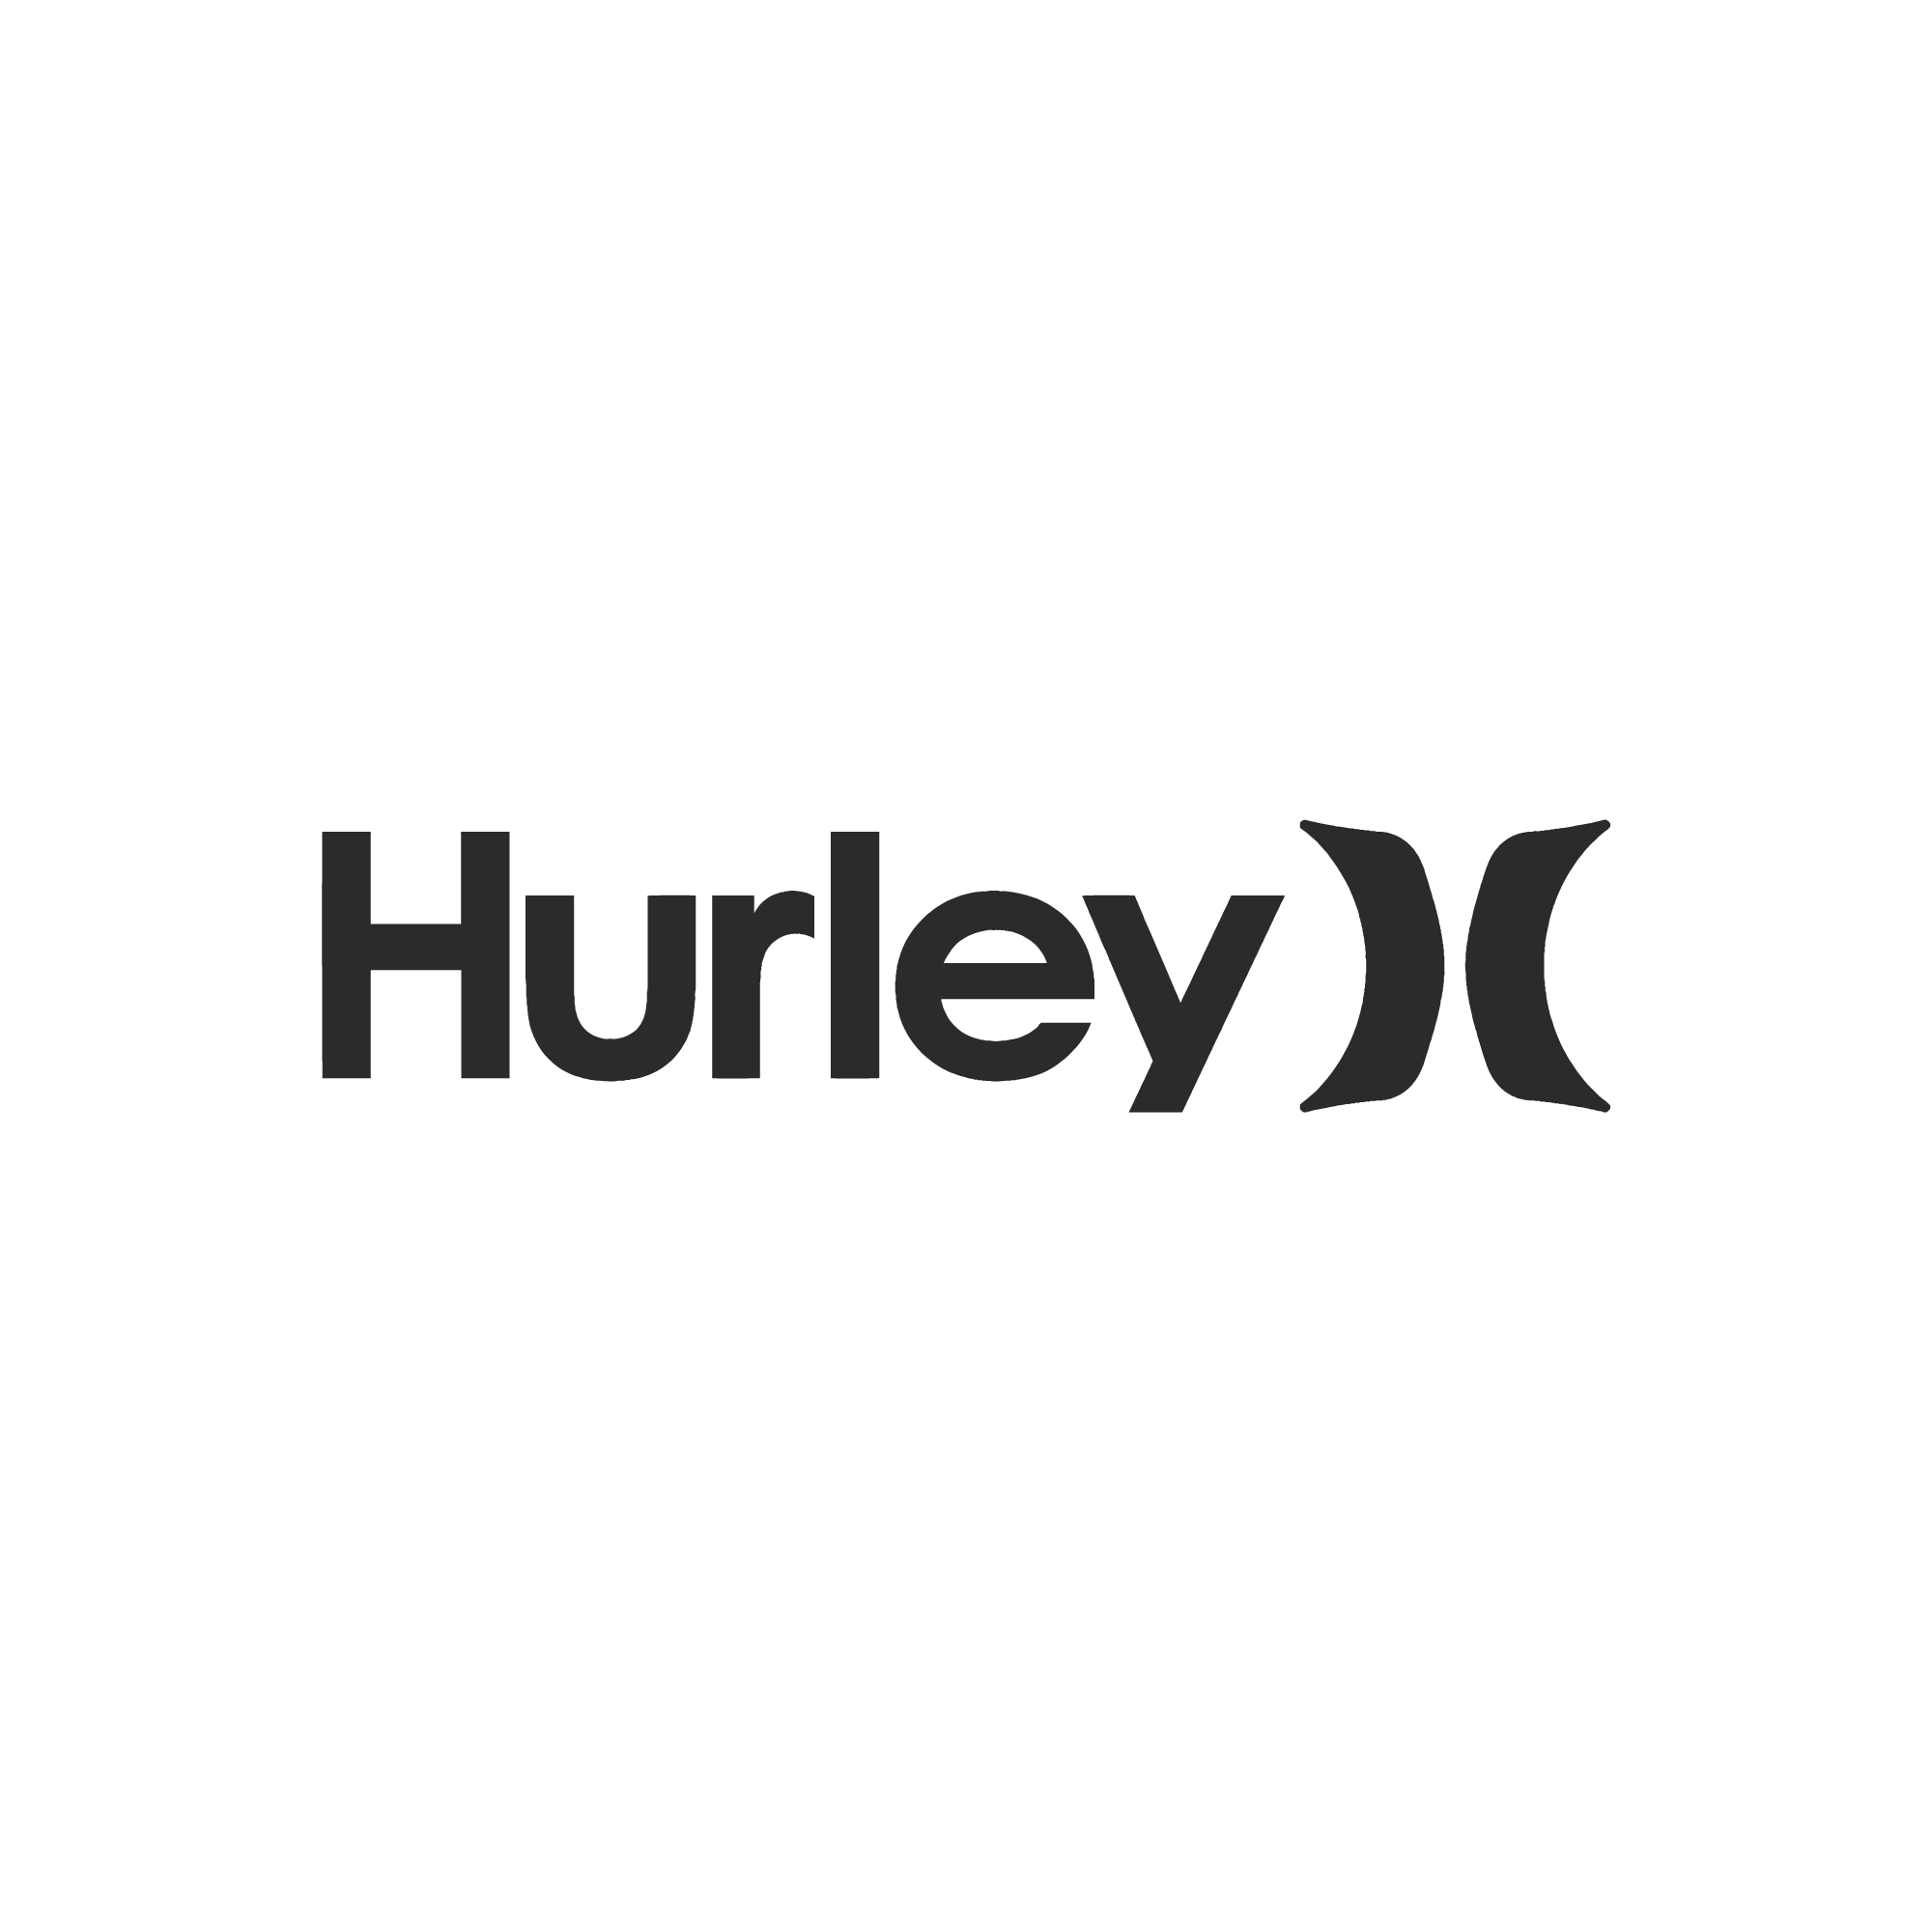 Hurley, Zefyr Consulting, Supply Chain Manufacturing, Zephyr Consulting, Footwear and Apparel Industry Consultants, Dave Kelley, Portland, Oregon E2E Business Consultants, Corporate Sustainability.png